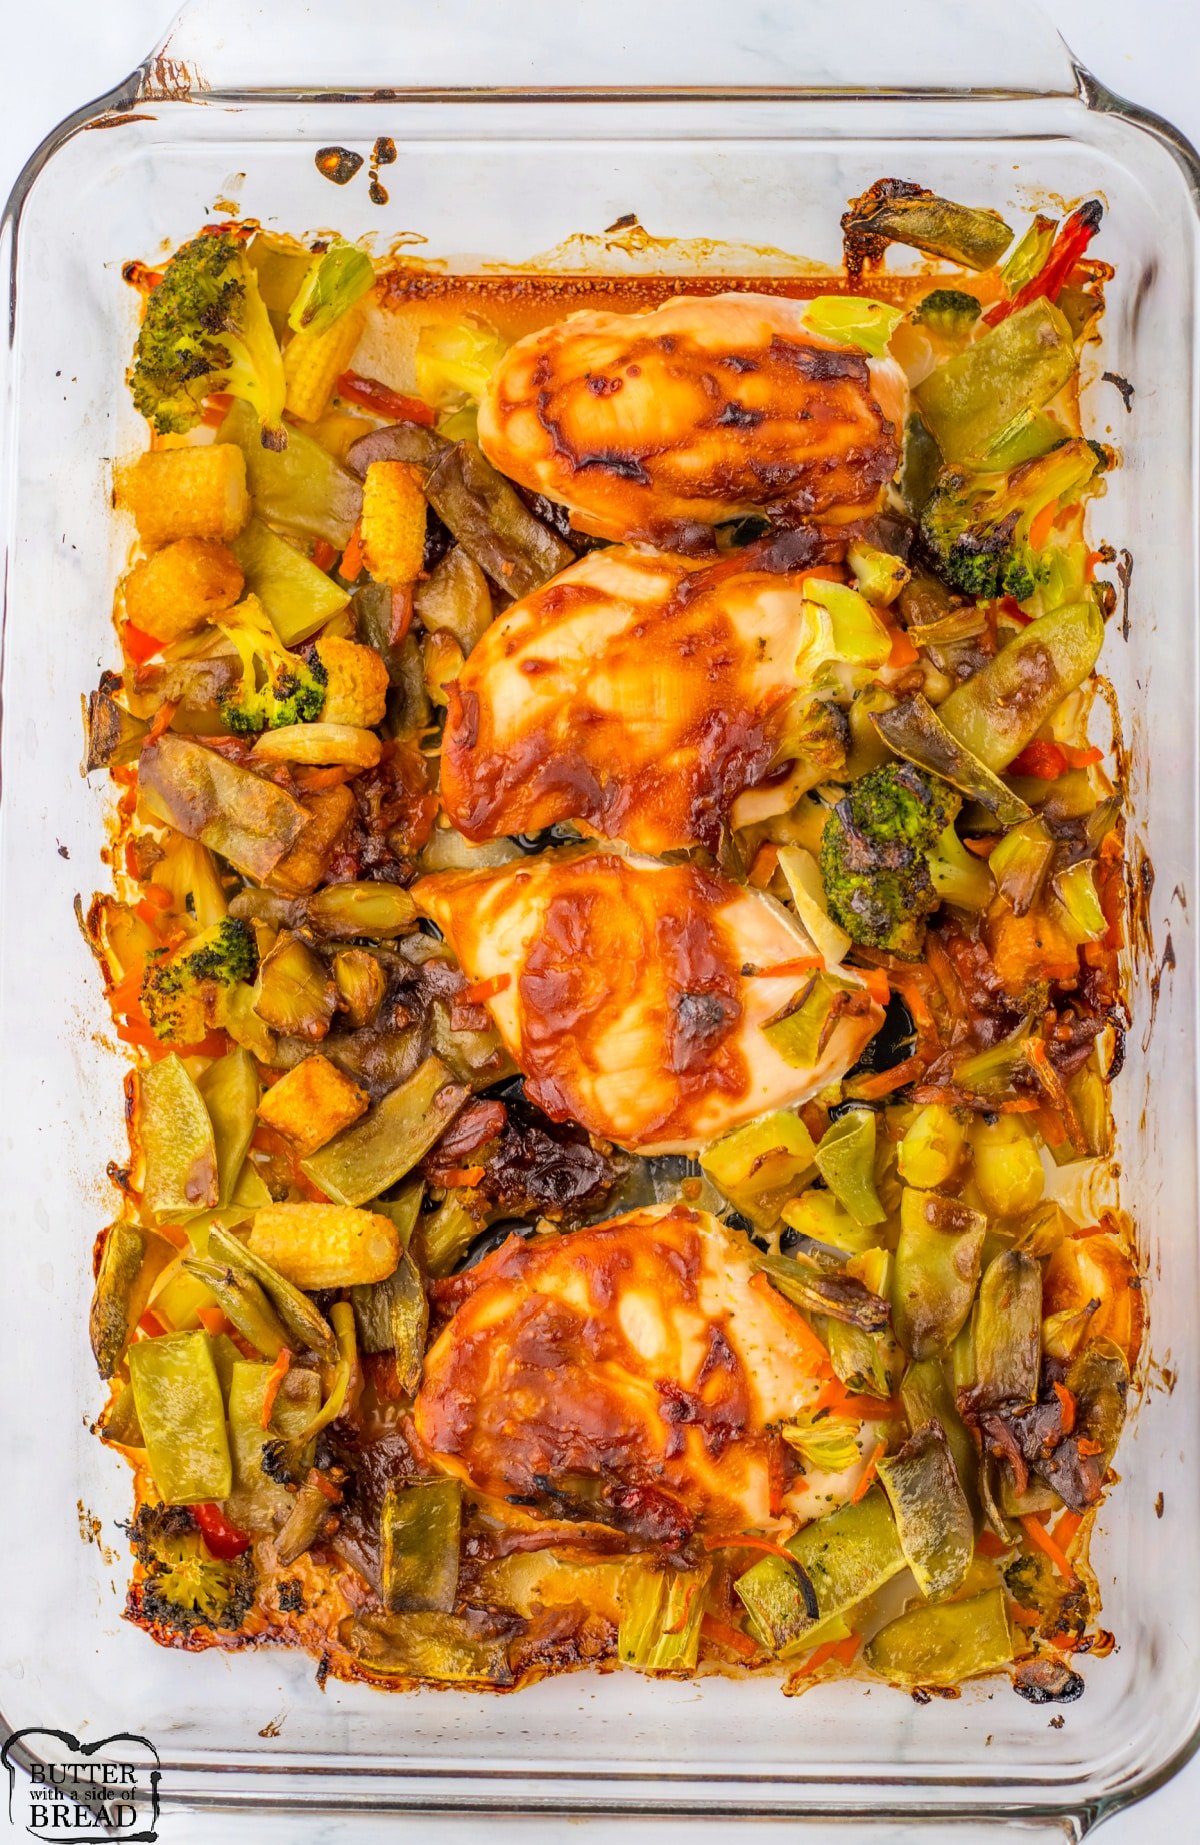 Baked chicken and vegetables.